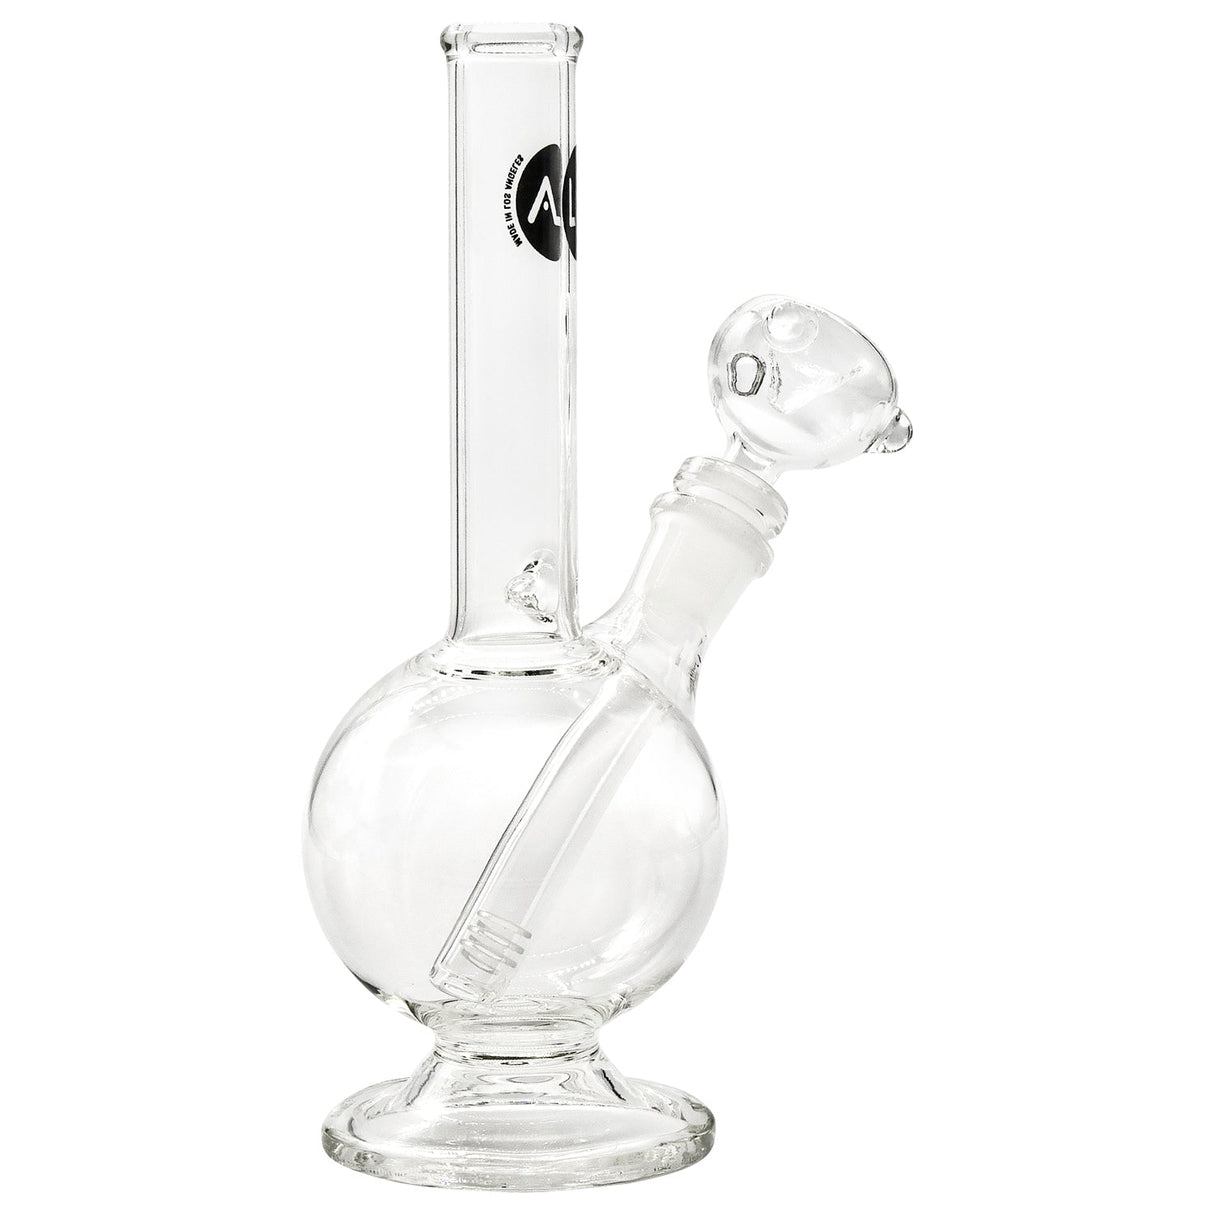 LA Pipes Pedestal Basic Bong, 8" tall, 45-degree joint, 18-19mm, borosilicate glass, front view